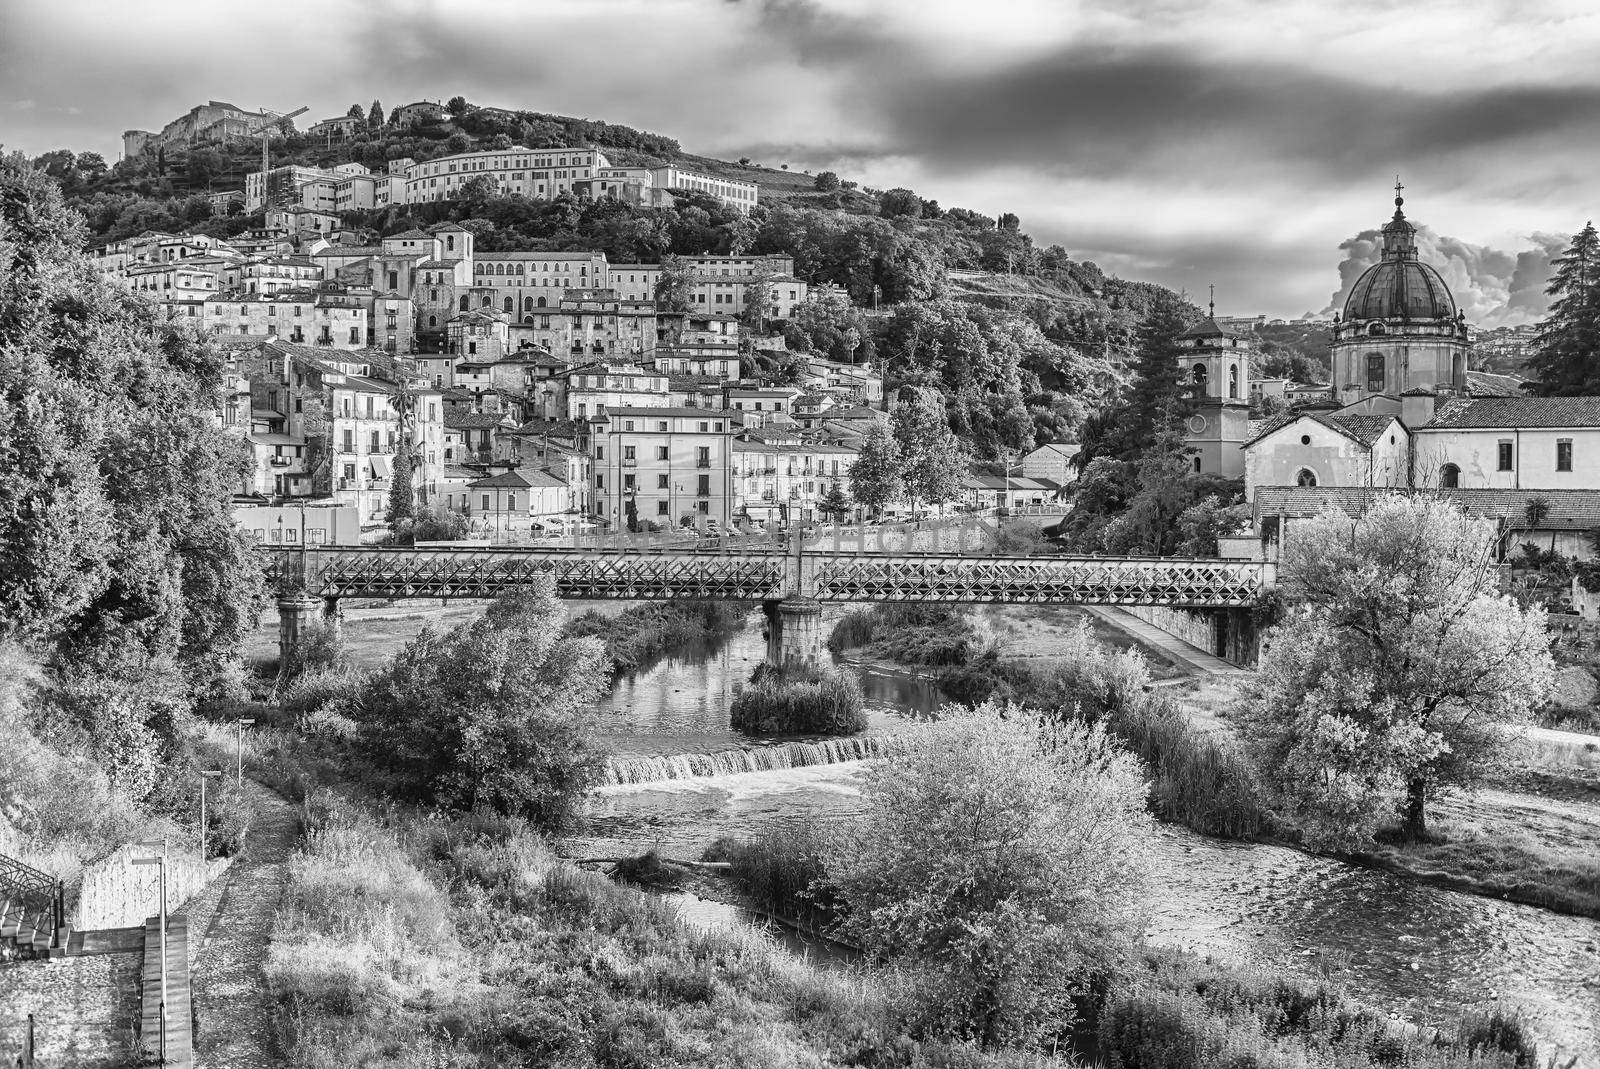 Scenic view of the Old Town of Cosenza, Calabria, Italy by marcorubino